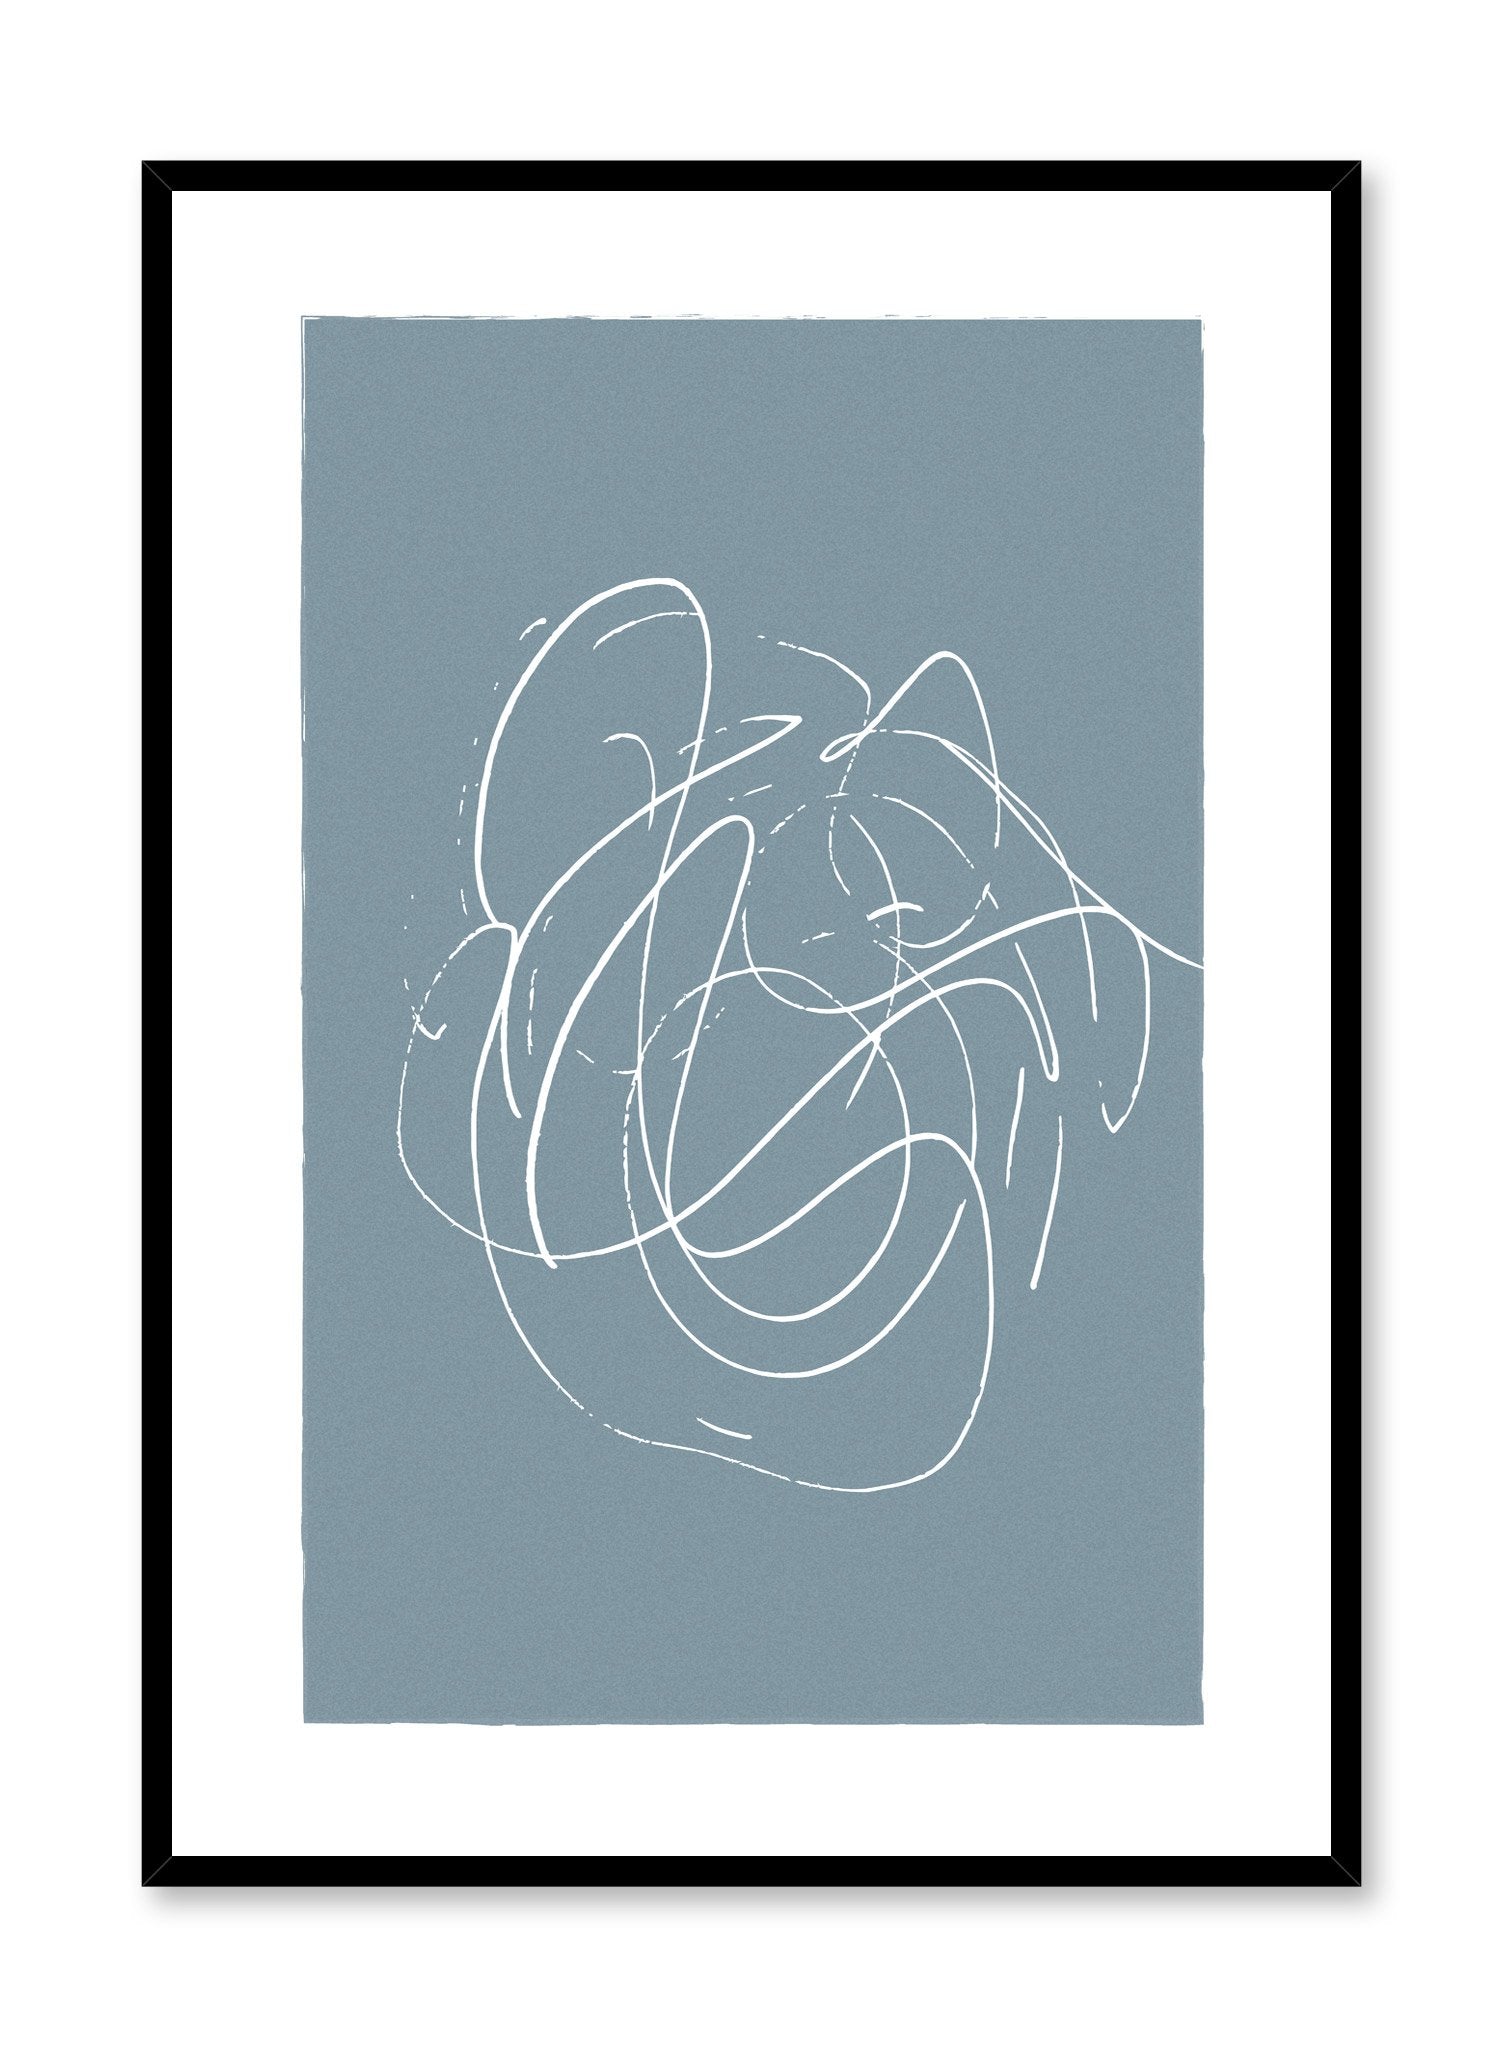 Scandinavian poster by Opposite Wall with hand-made art design with blue swirls